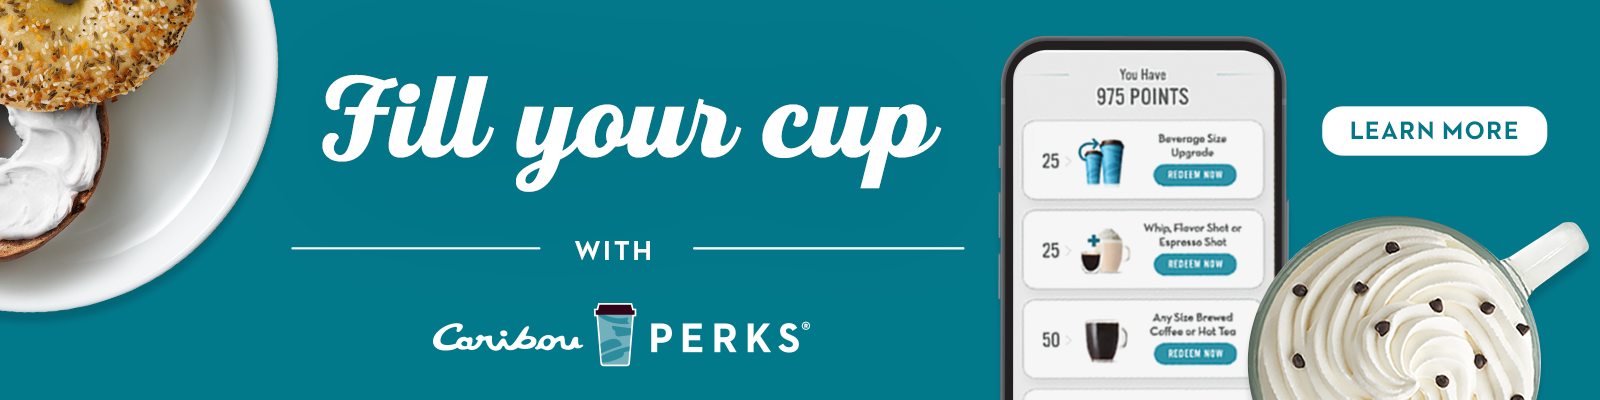 Fill your cup with Caribou Perks. Learn More today